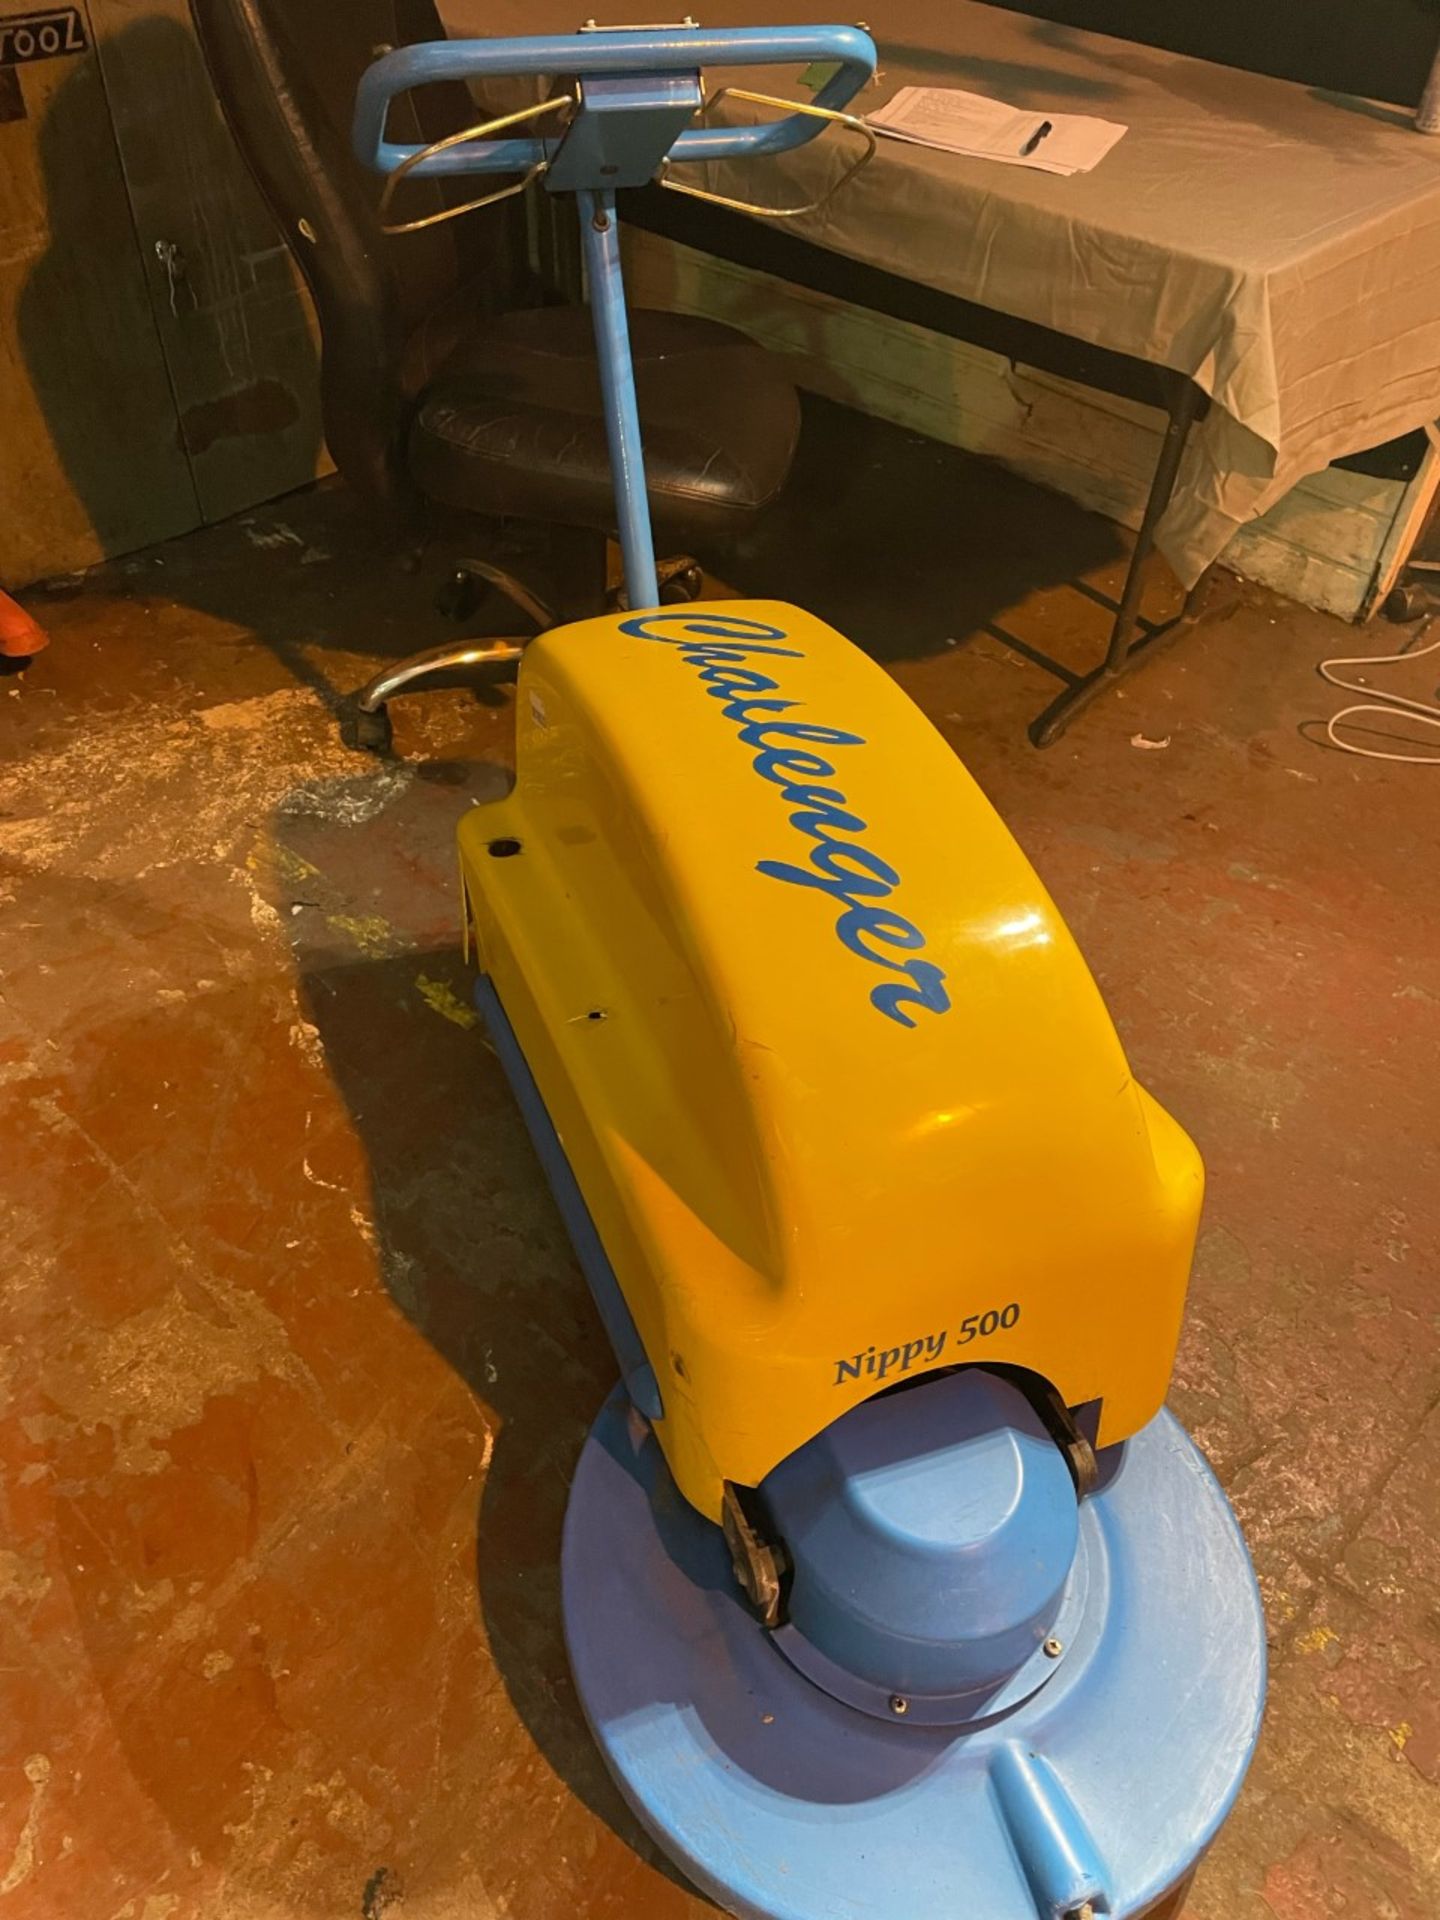 Tennent Challenger nippy 500 high speed floor burnisher. Needs batteries charged to work. Good